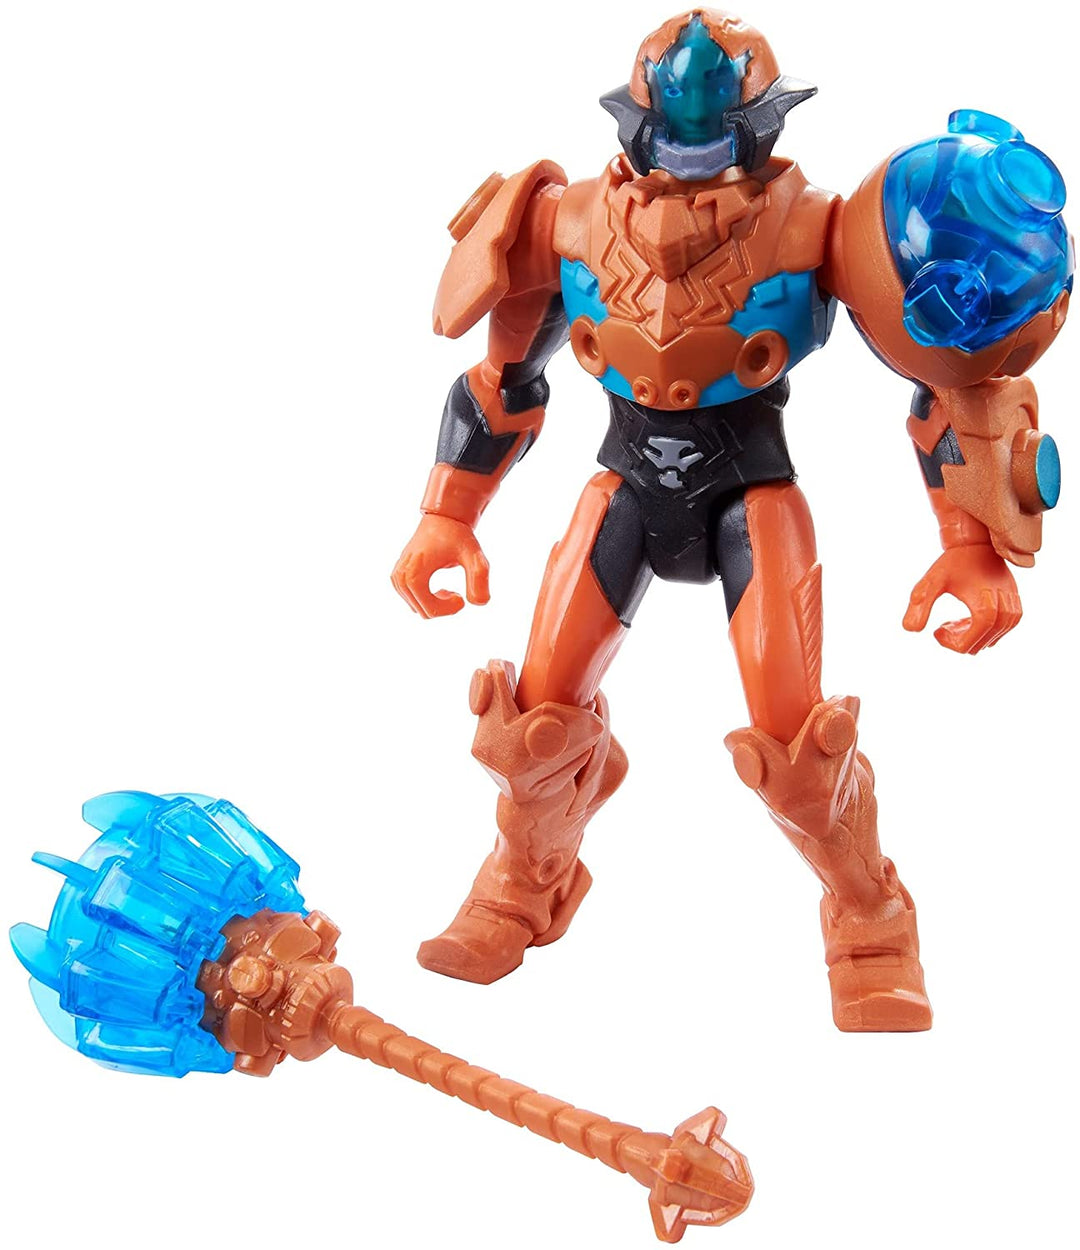 Masters of the Universe HBL68 Man-At-Arms-Actionfiguren, mehrfarbig